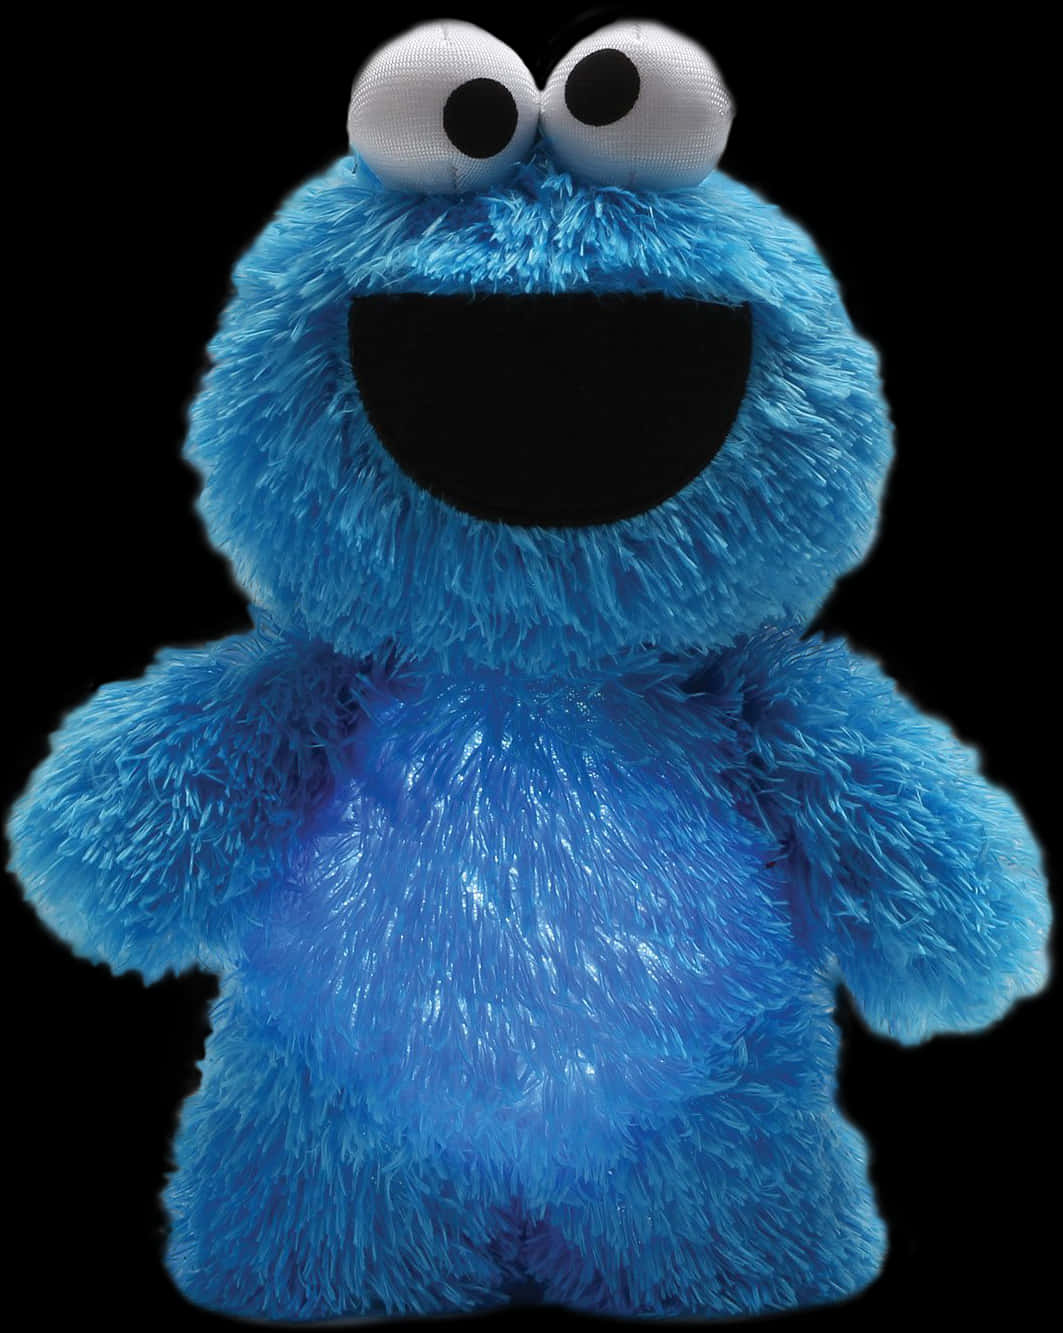 A Blue Stuffed Animal With White Eyes And A Black Background PNG